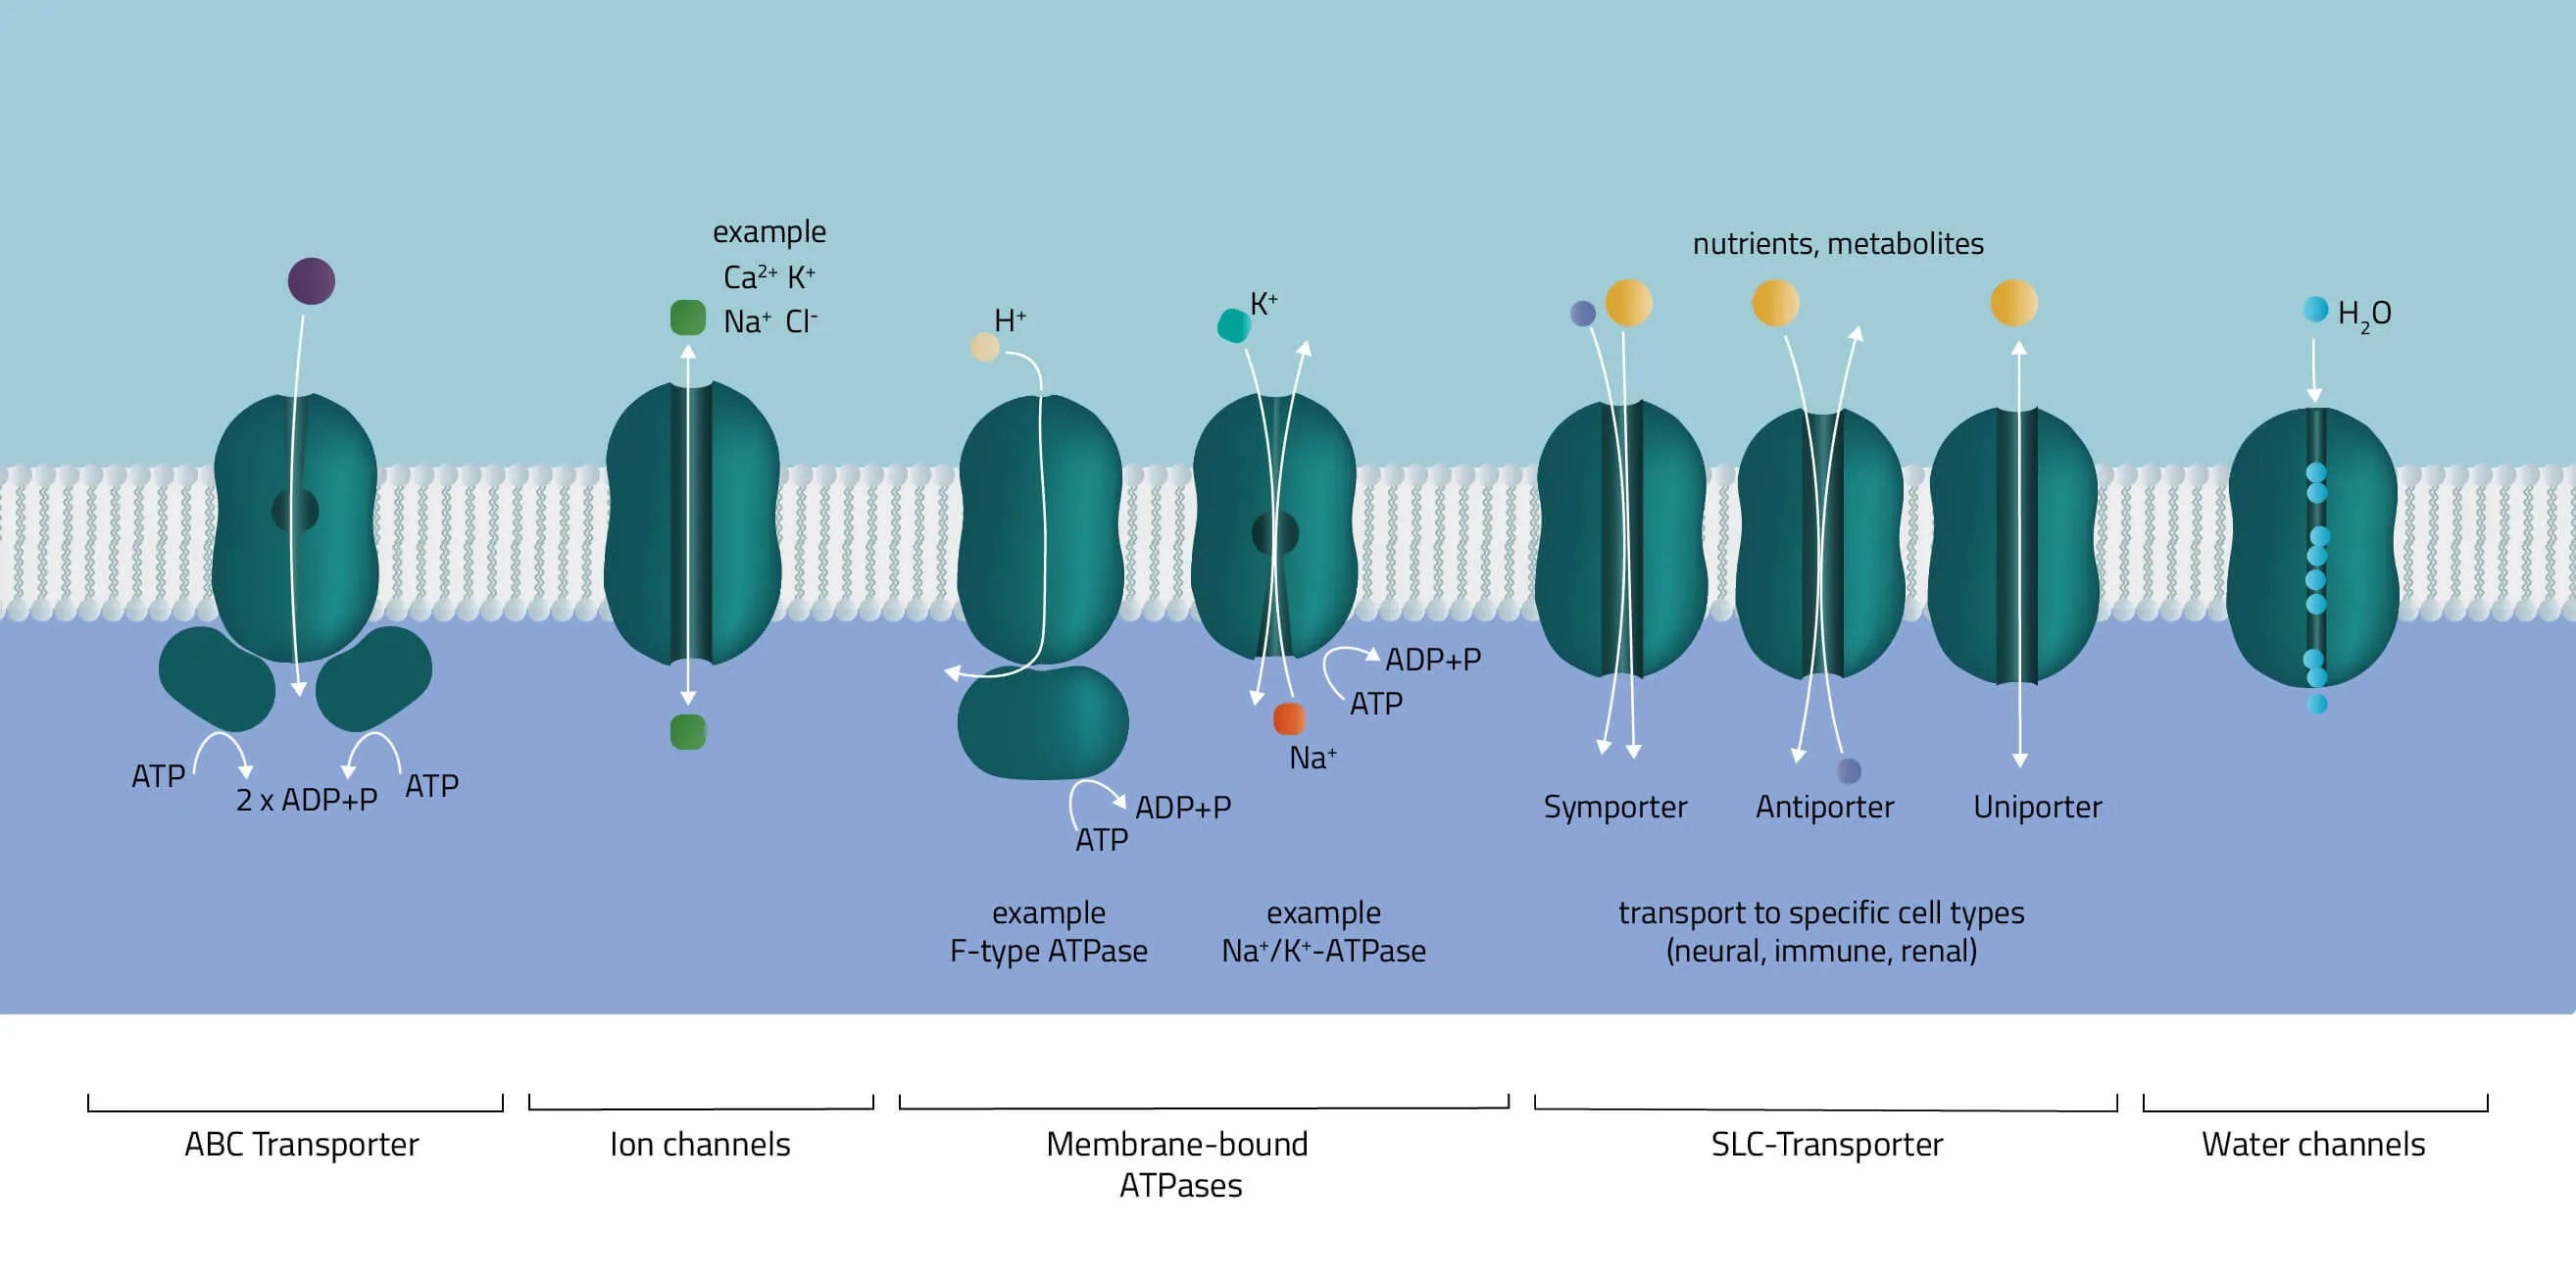 Selection of different transporter classes (ABC, Ion channel, ATPases, SLC-Transporter, Aquaporine)